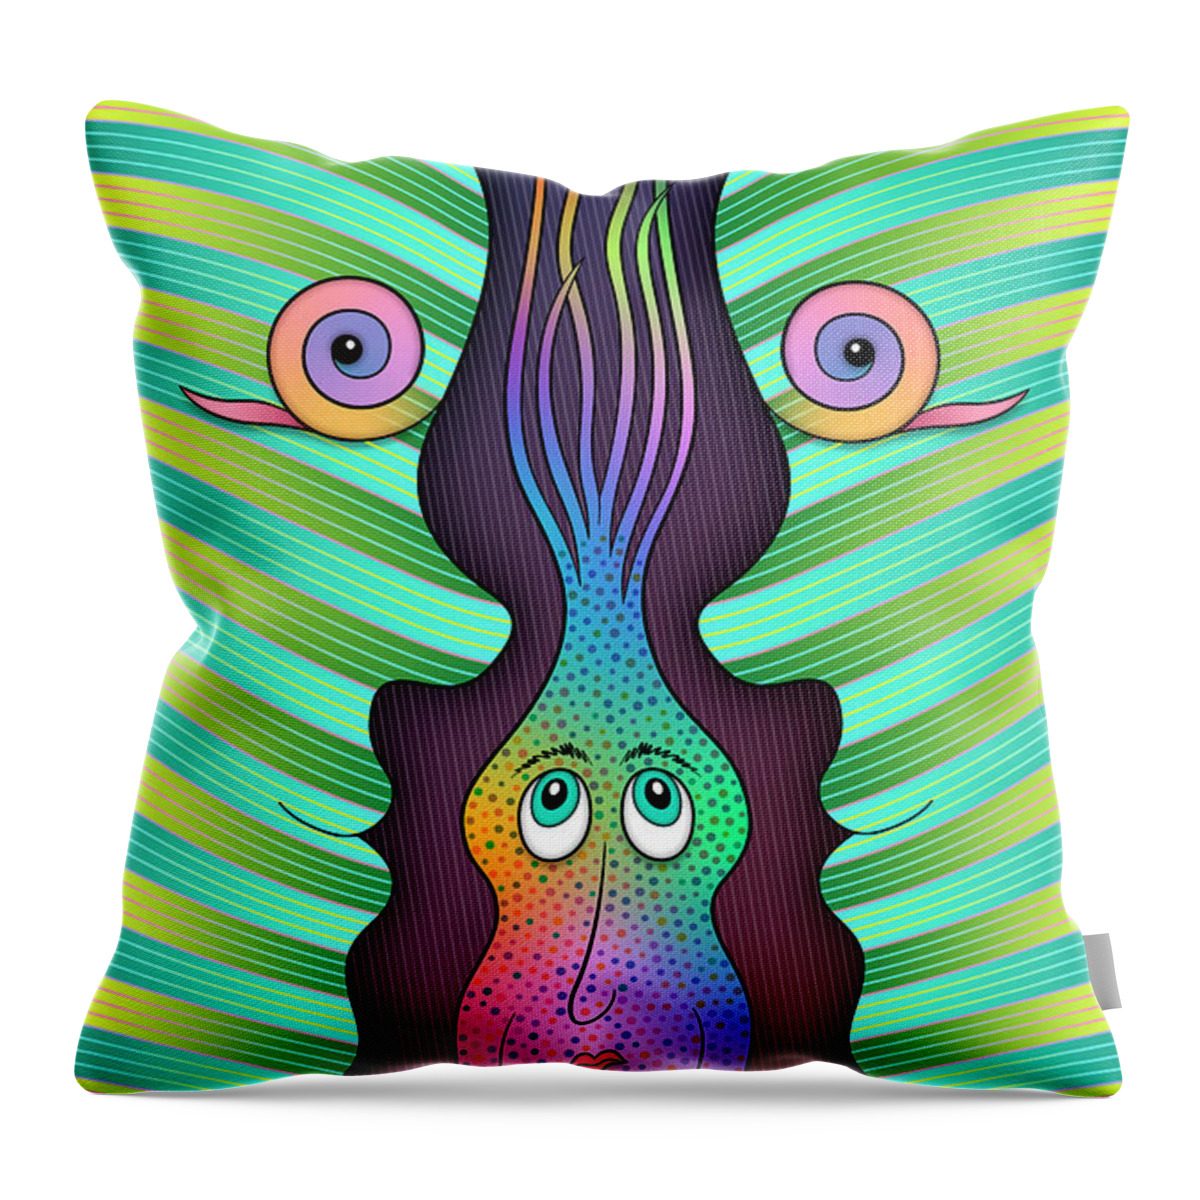 Just Another Pretty Face Throw Pillow featuring the digital art Trolling For Compliments by Becky Titus